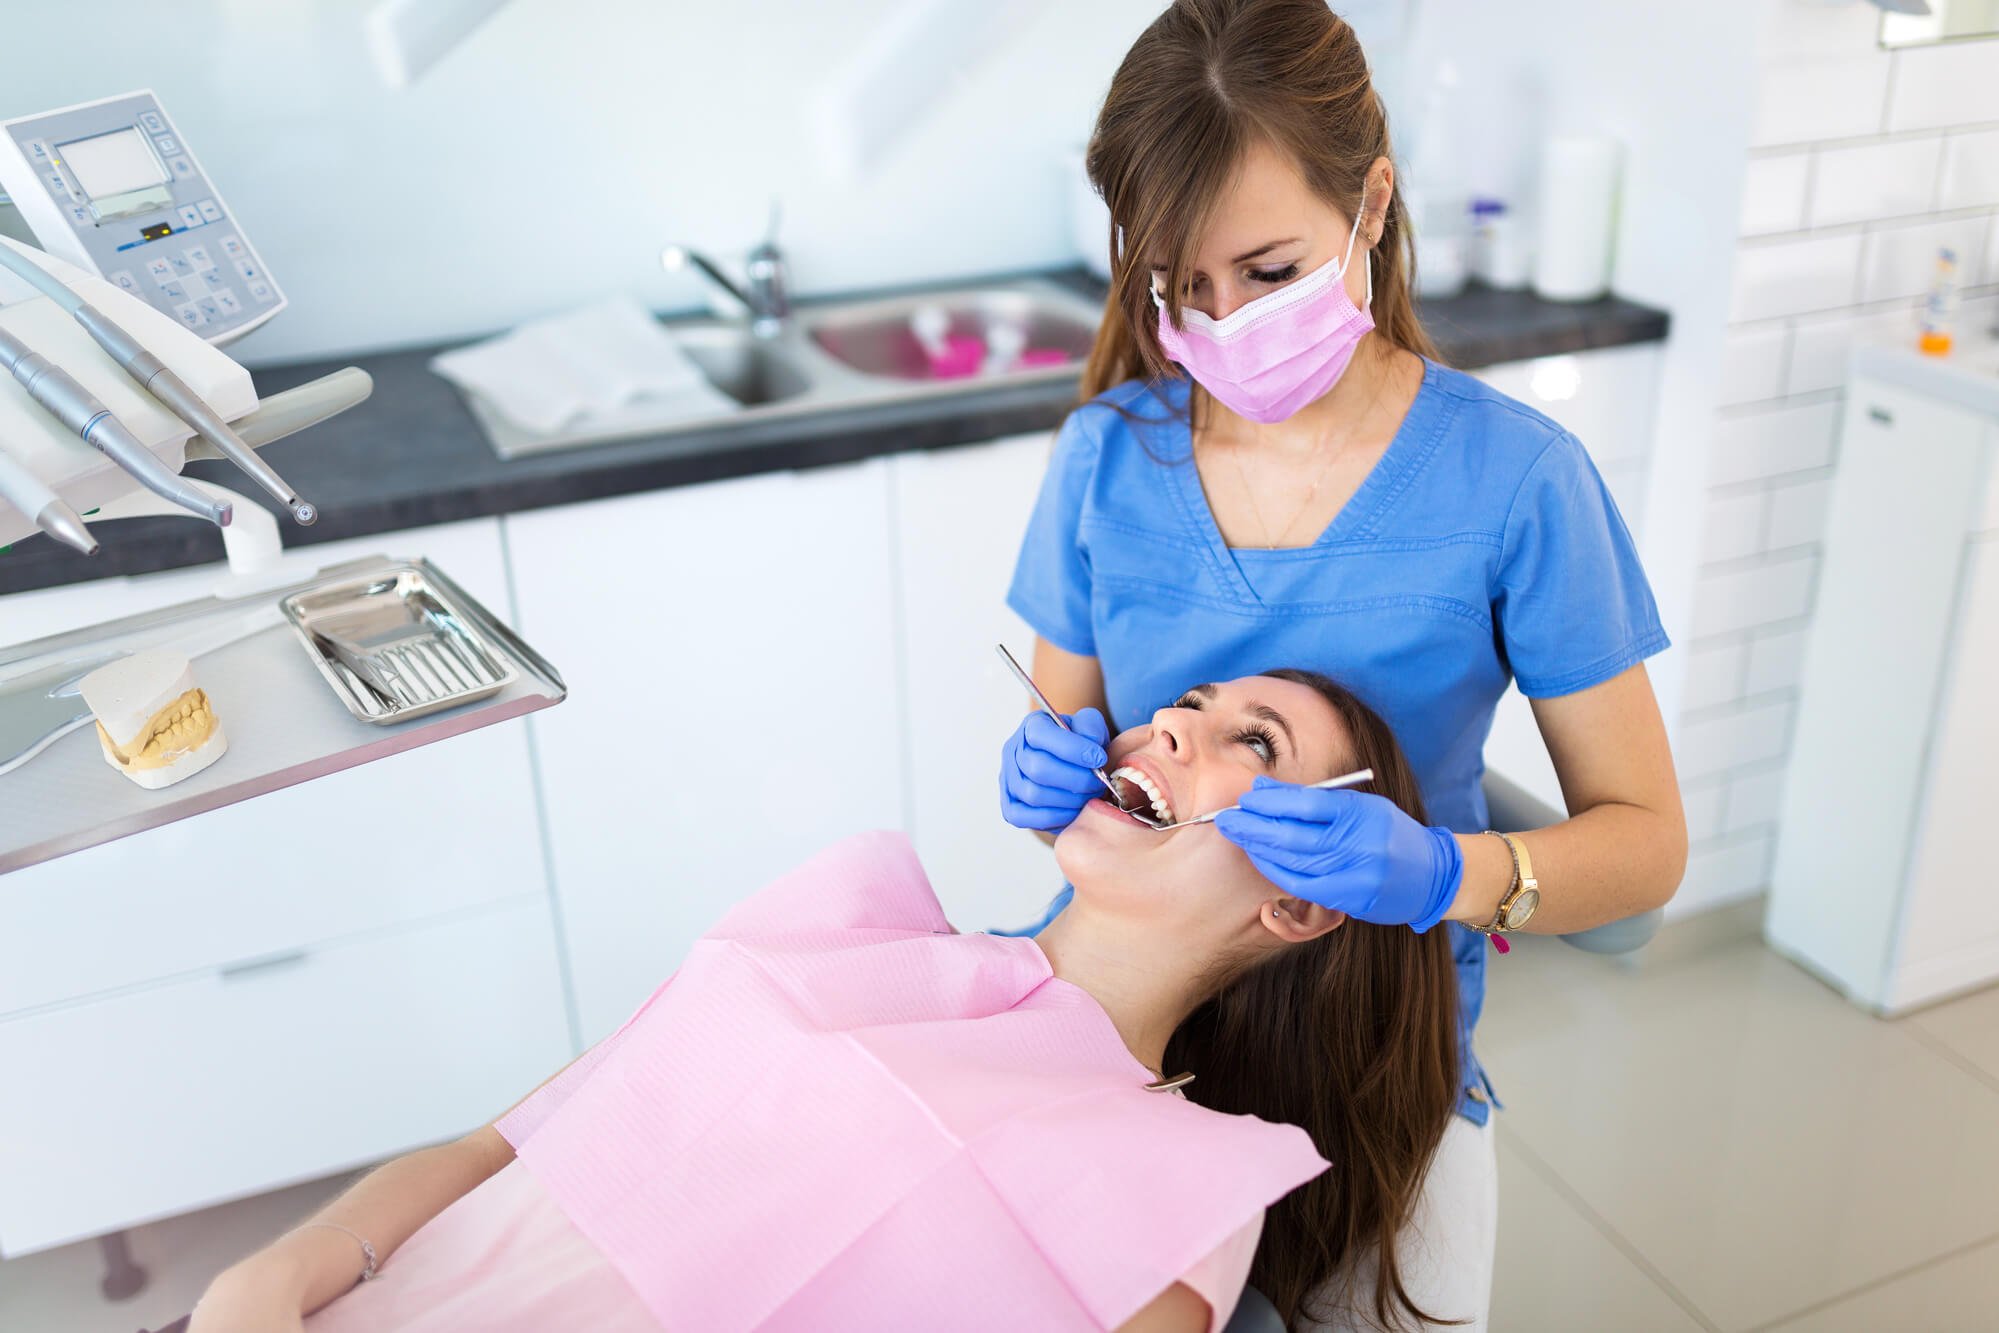 Where can I find Teeth Cleaning Miami?